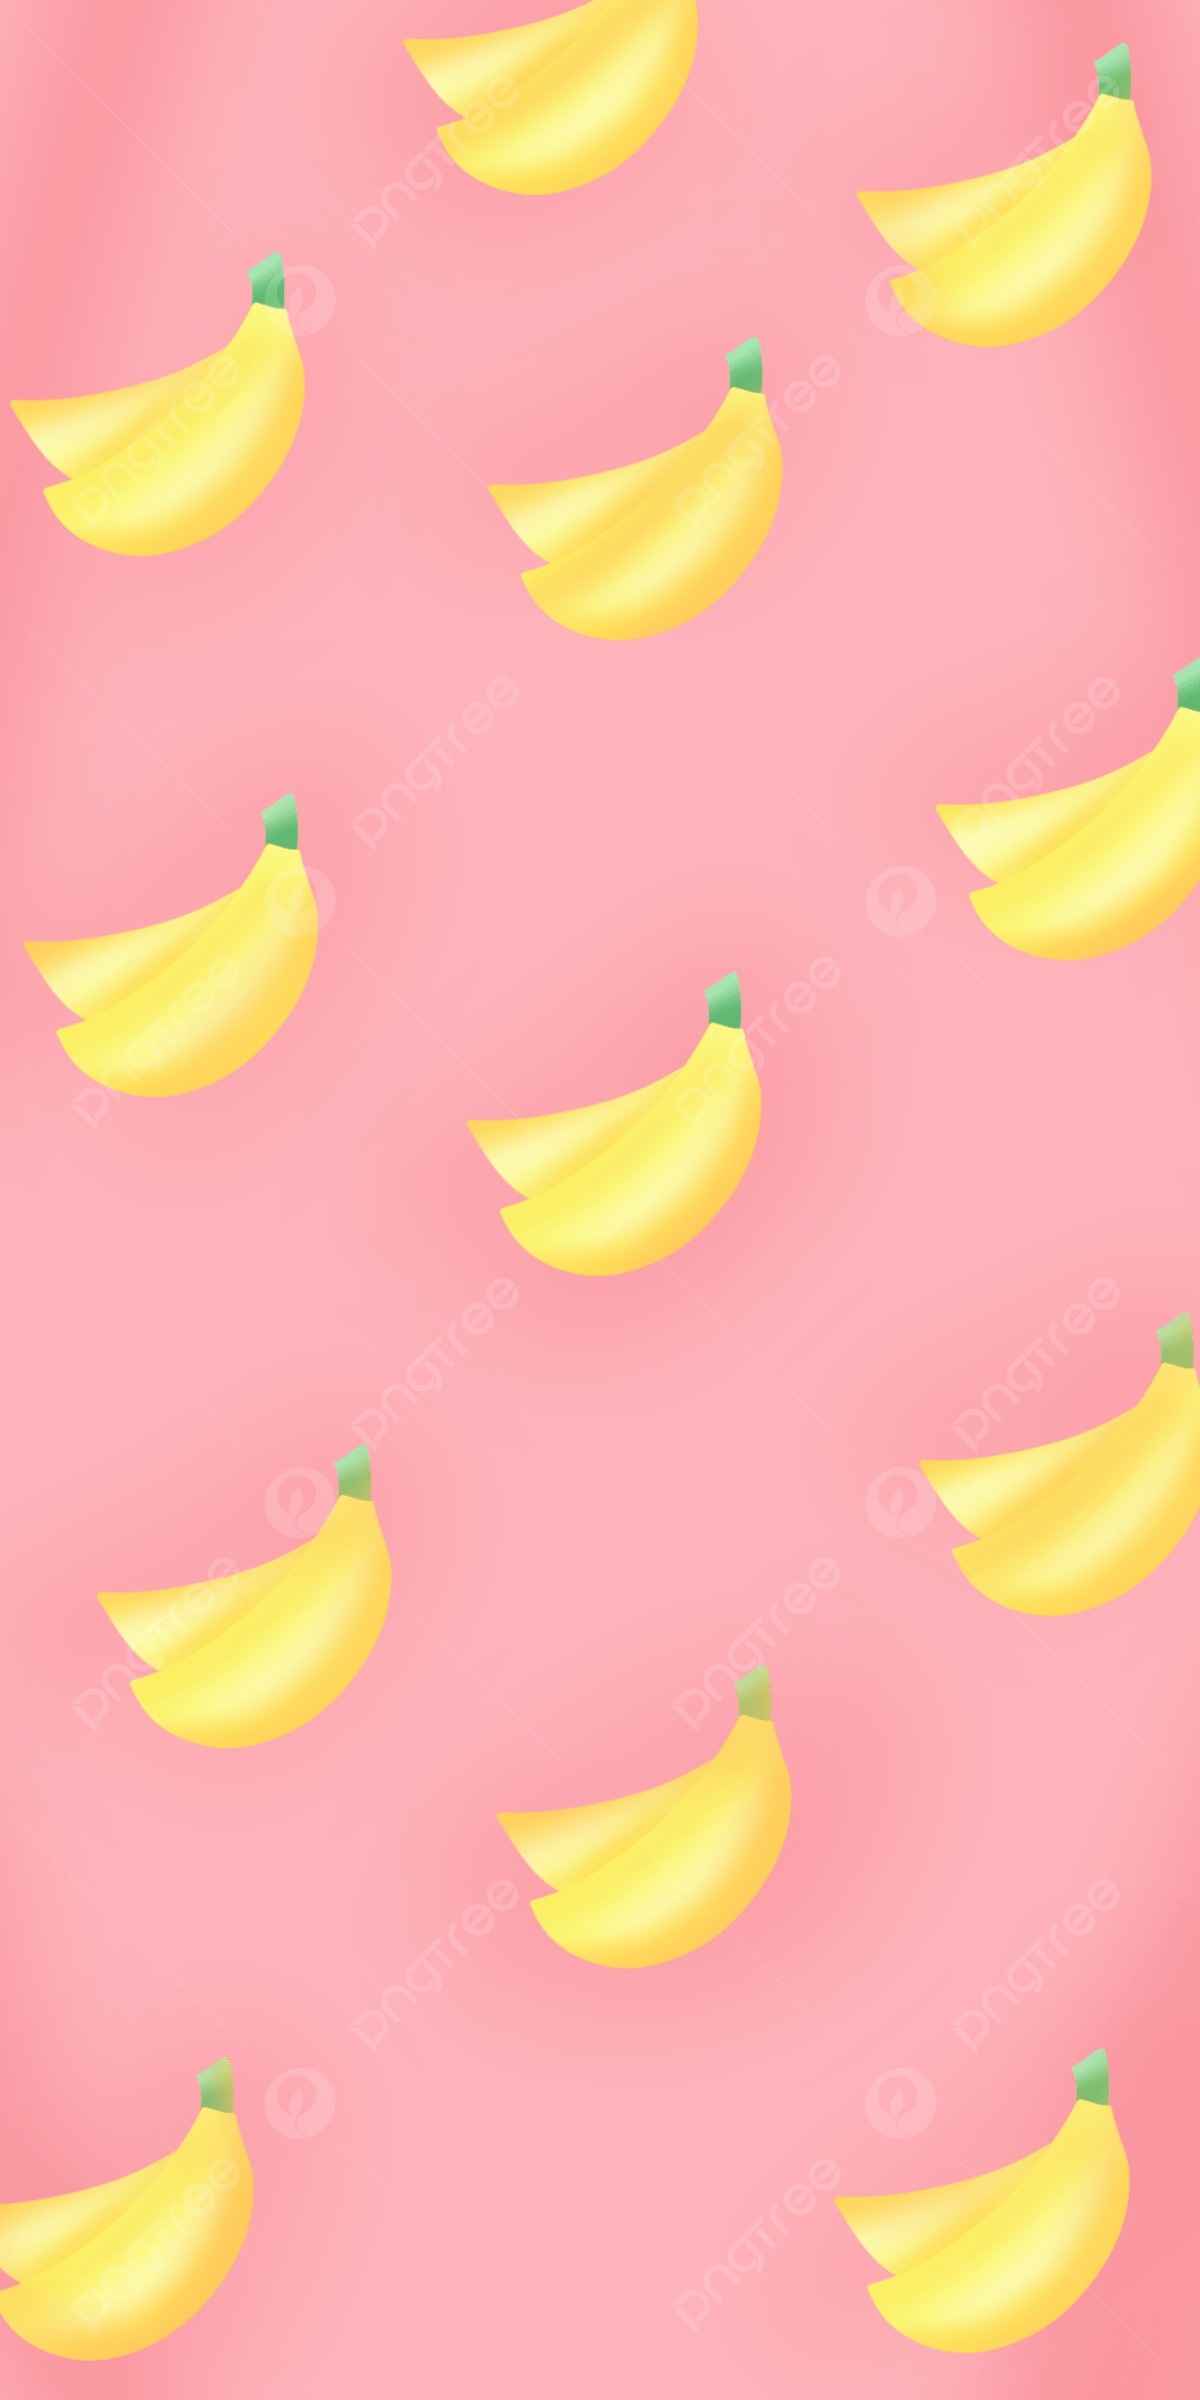 Banana Pink Background Wallpaper Image For Free Download